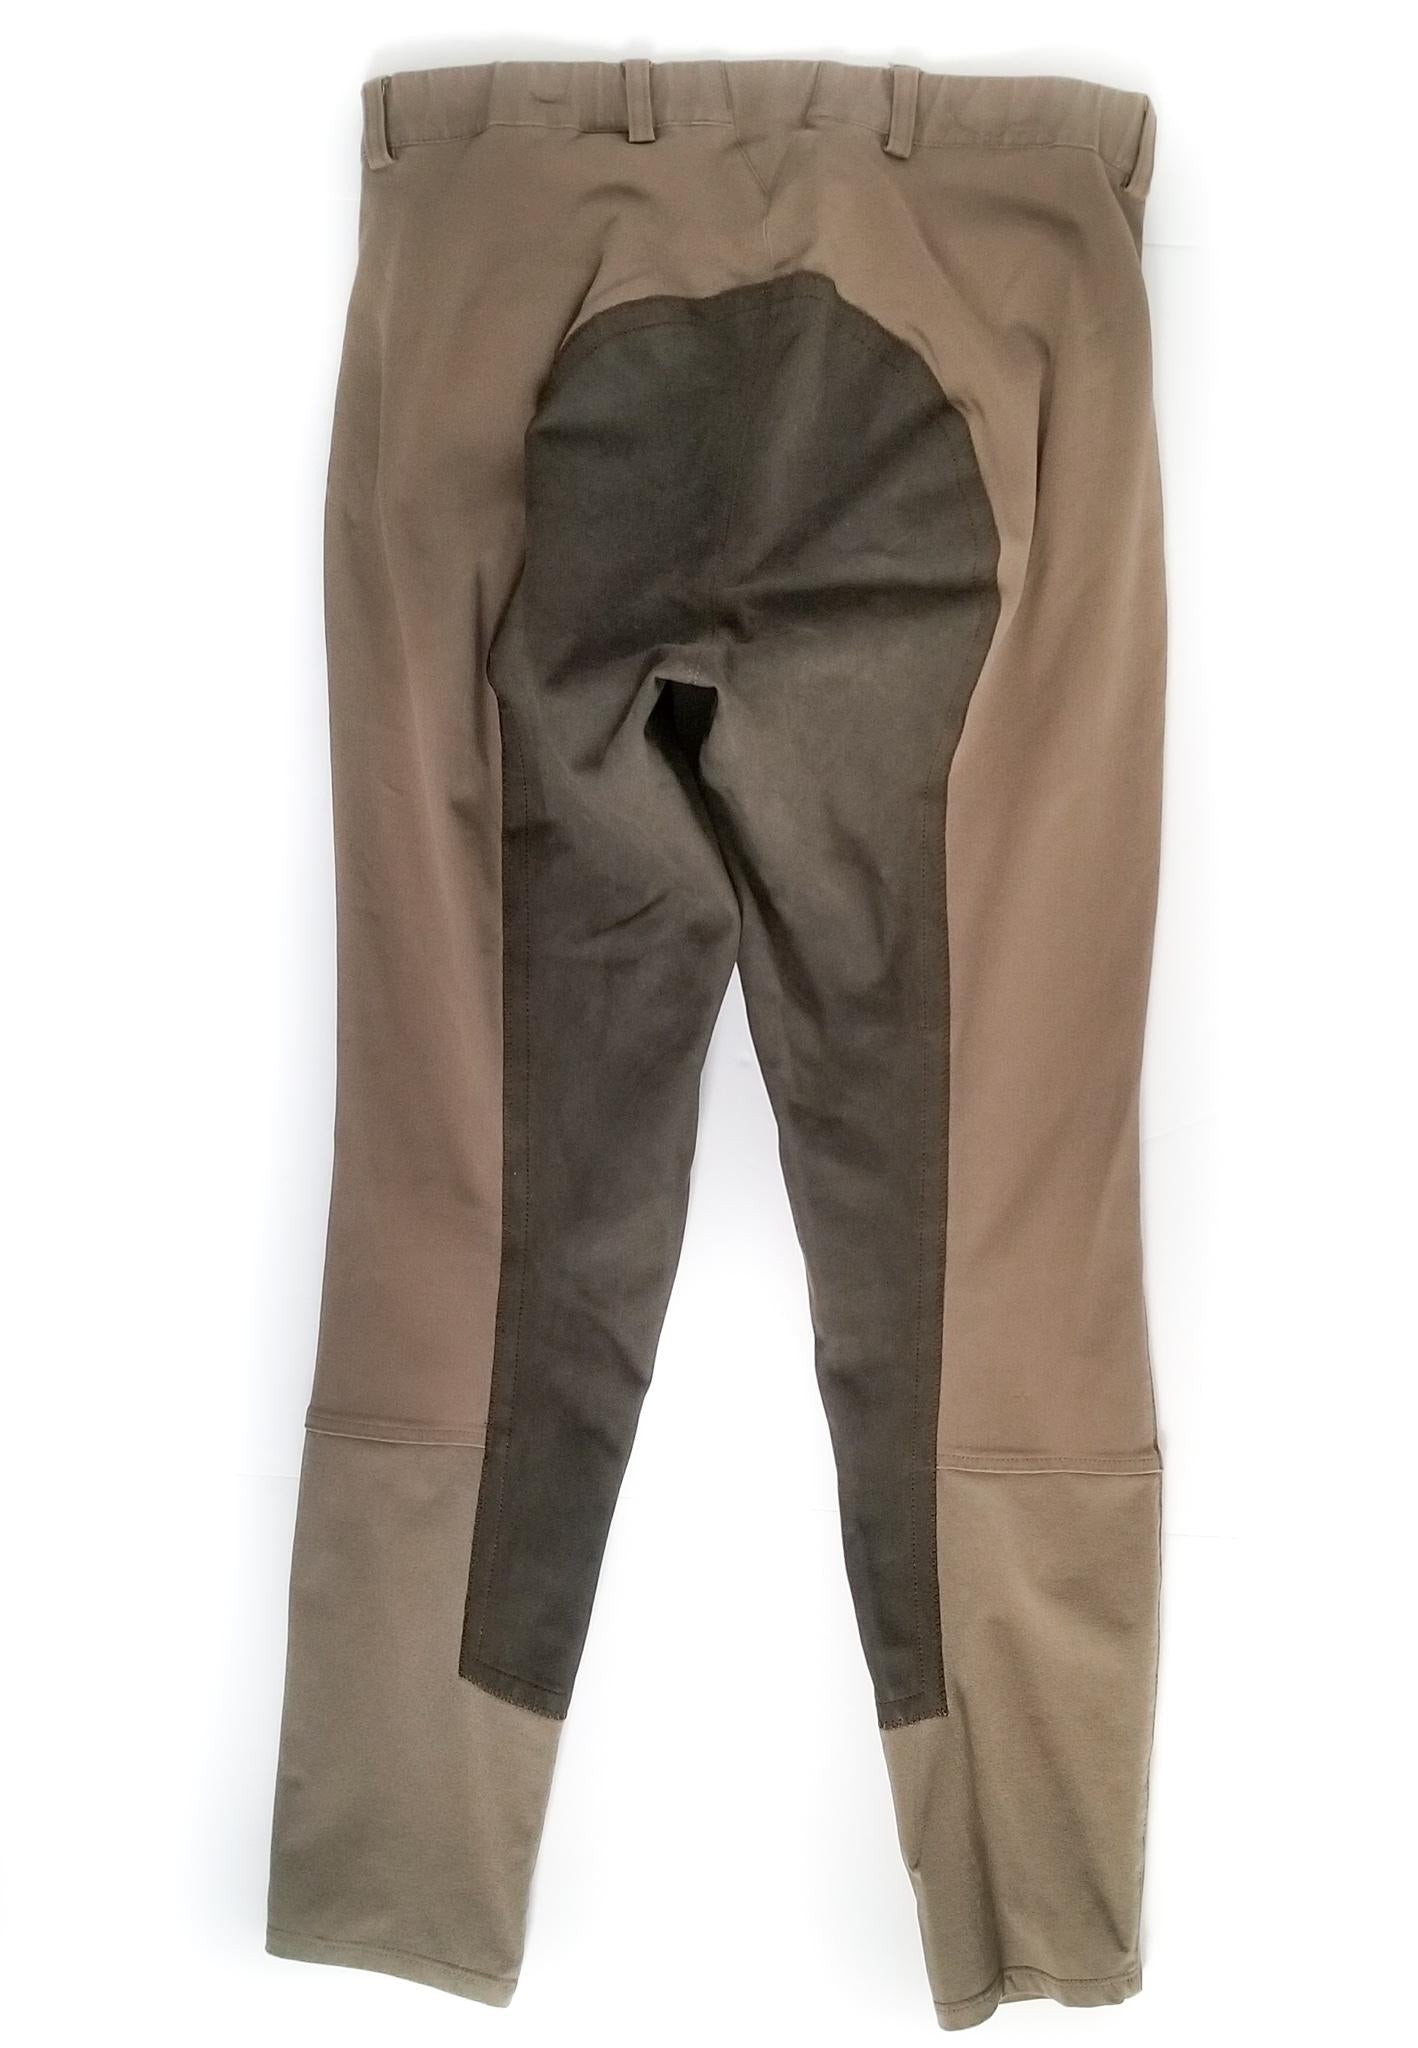 Ariat Olympia Full Seat Breeches - Light Brown - 32R